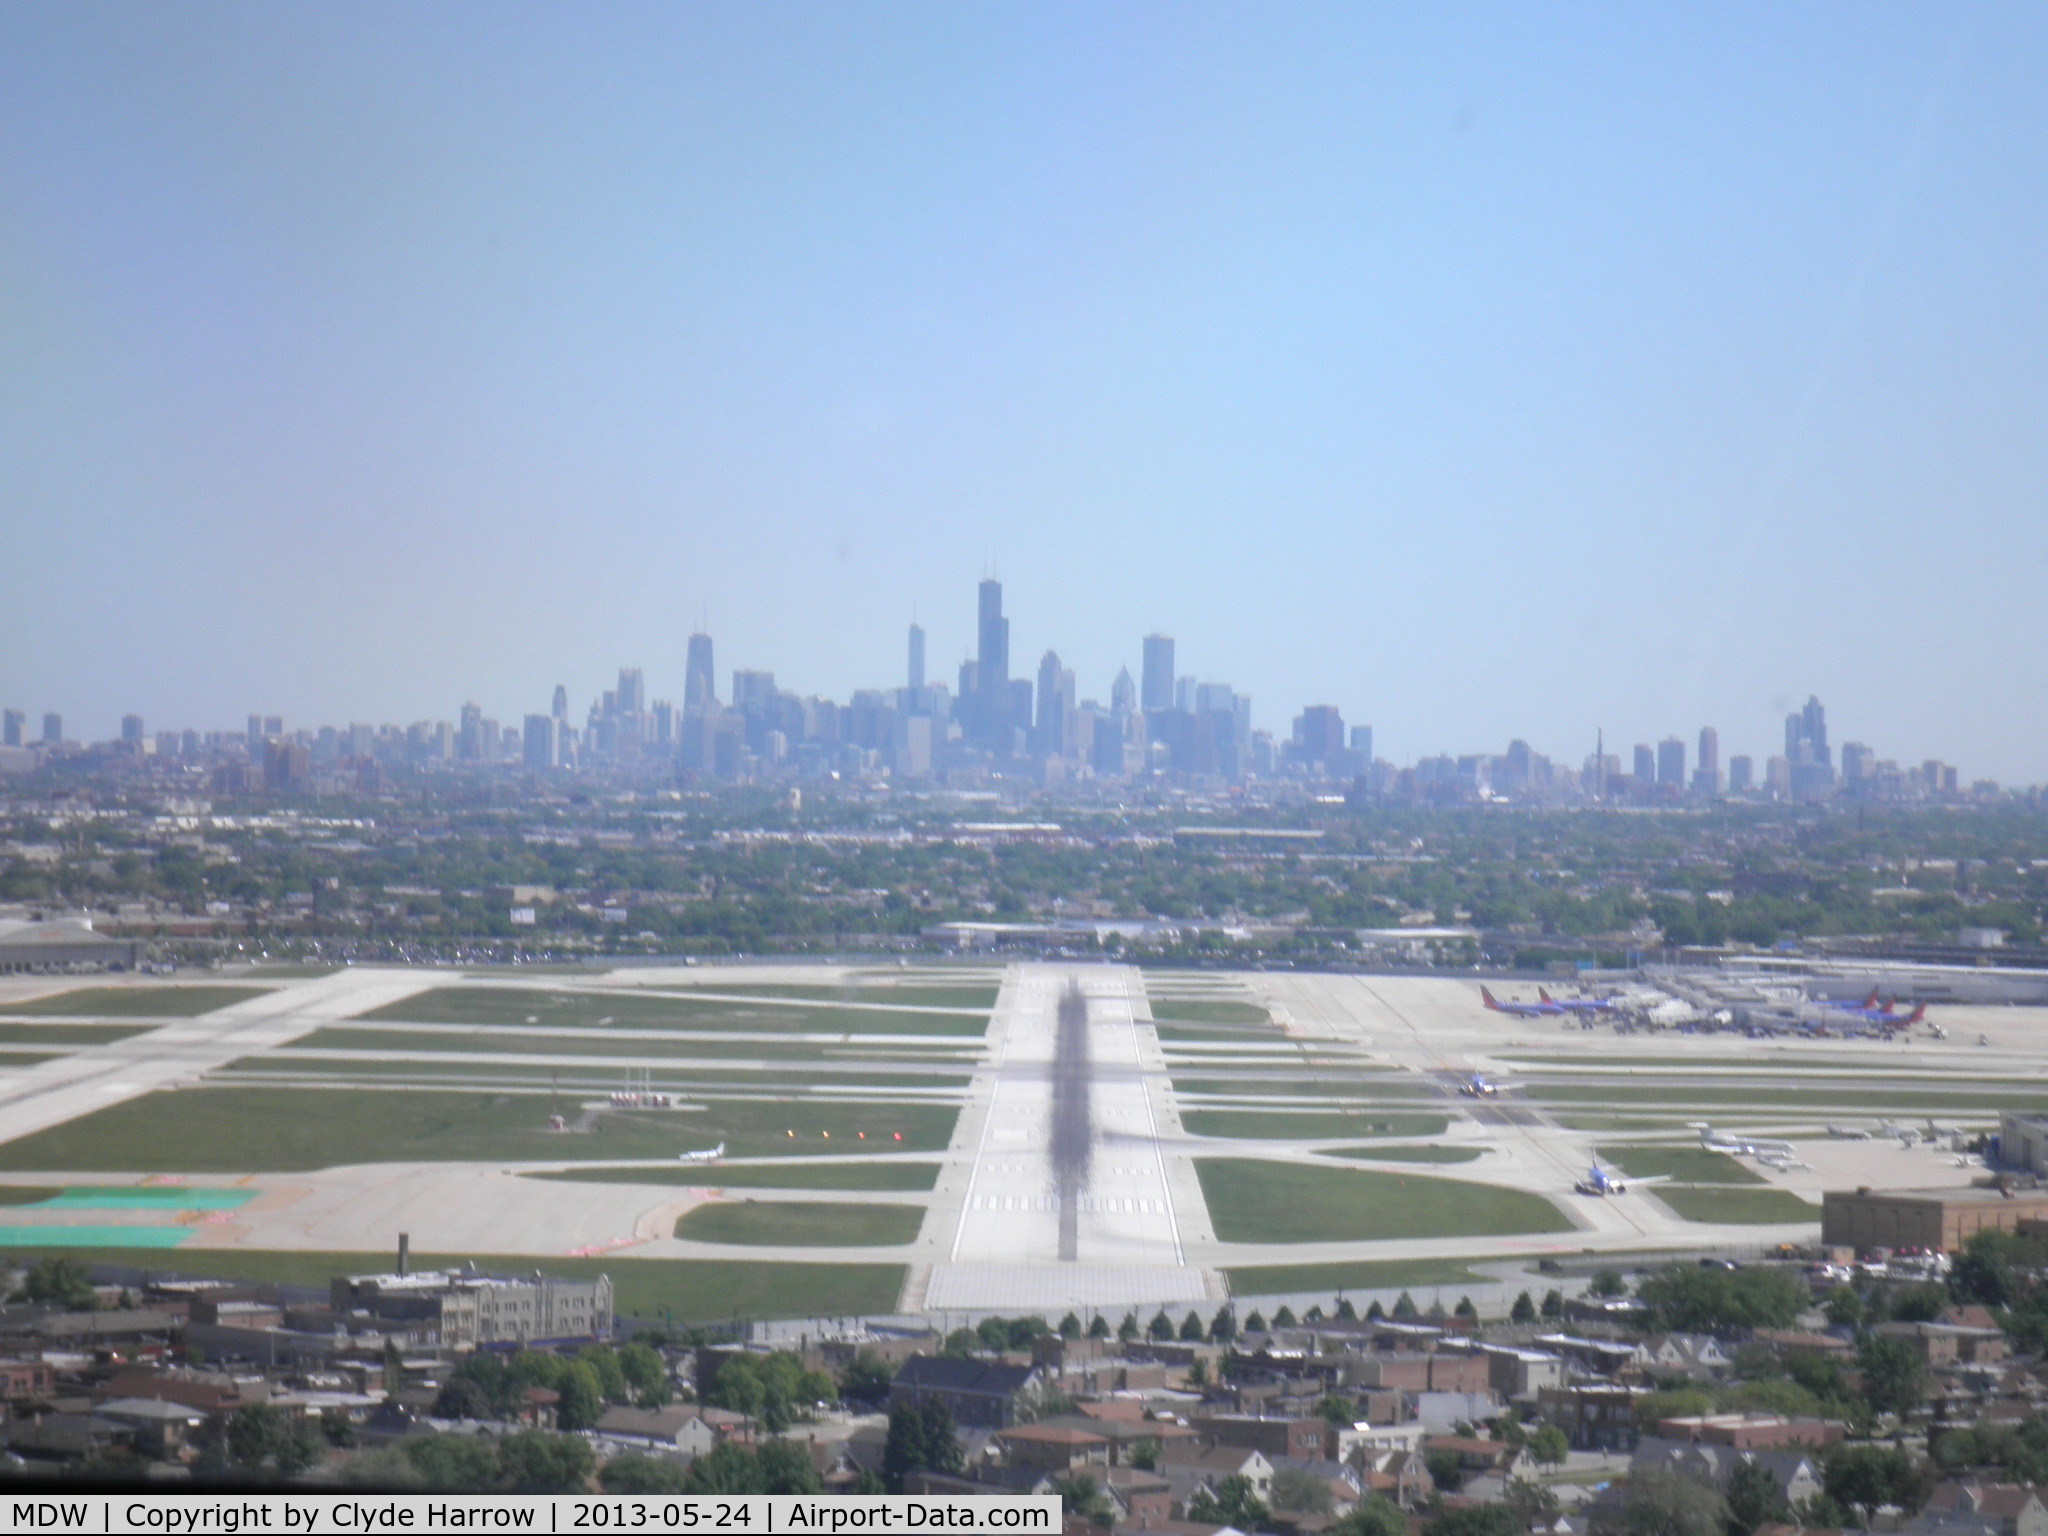 Chicago Midway International Airport (MDW) - On final into MDW